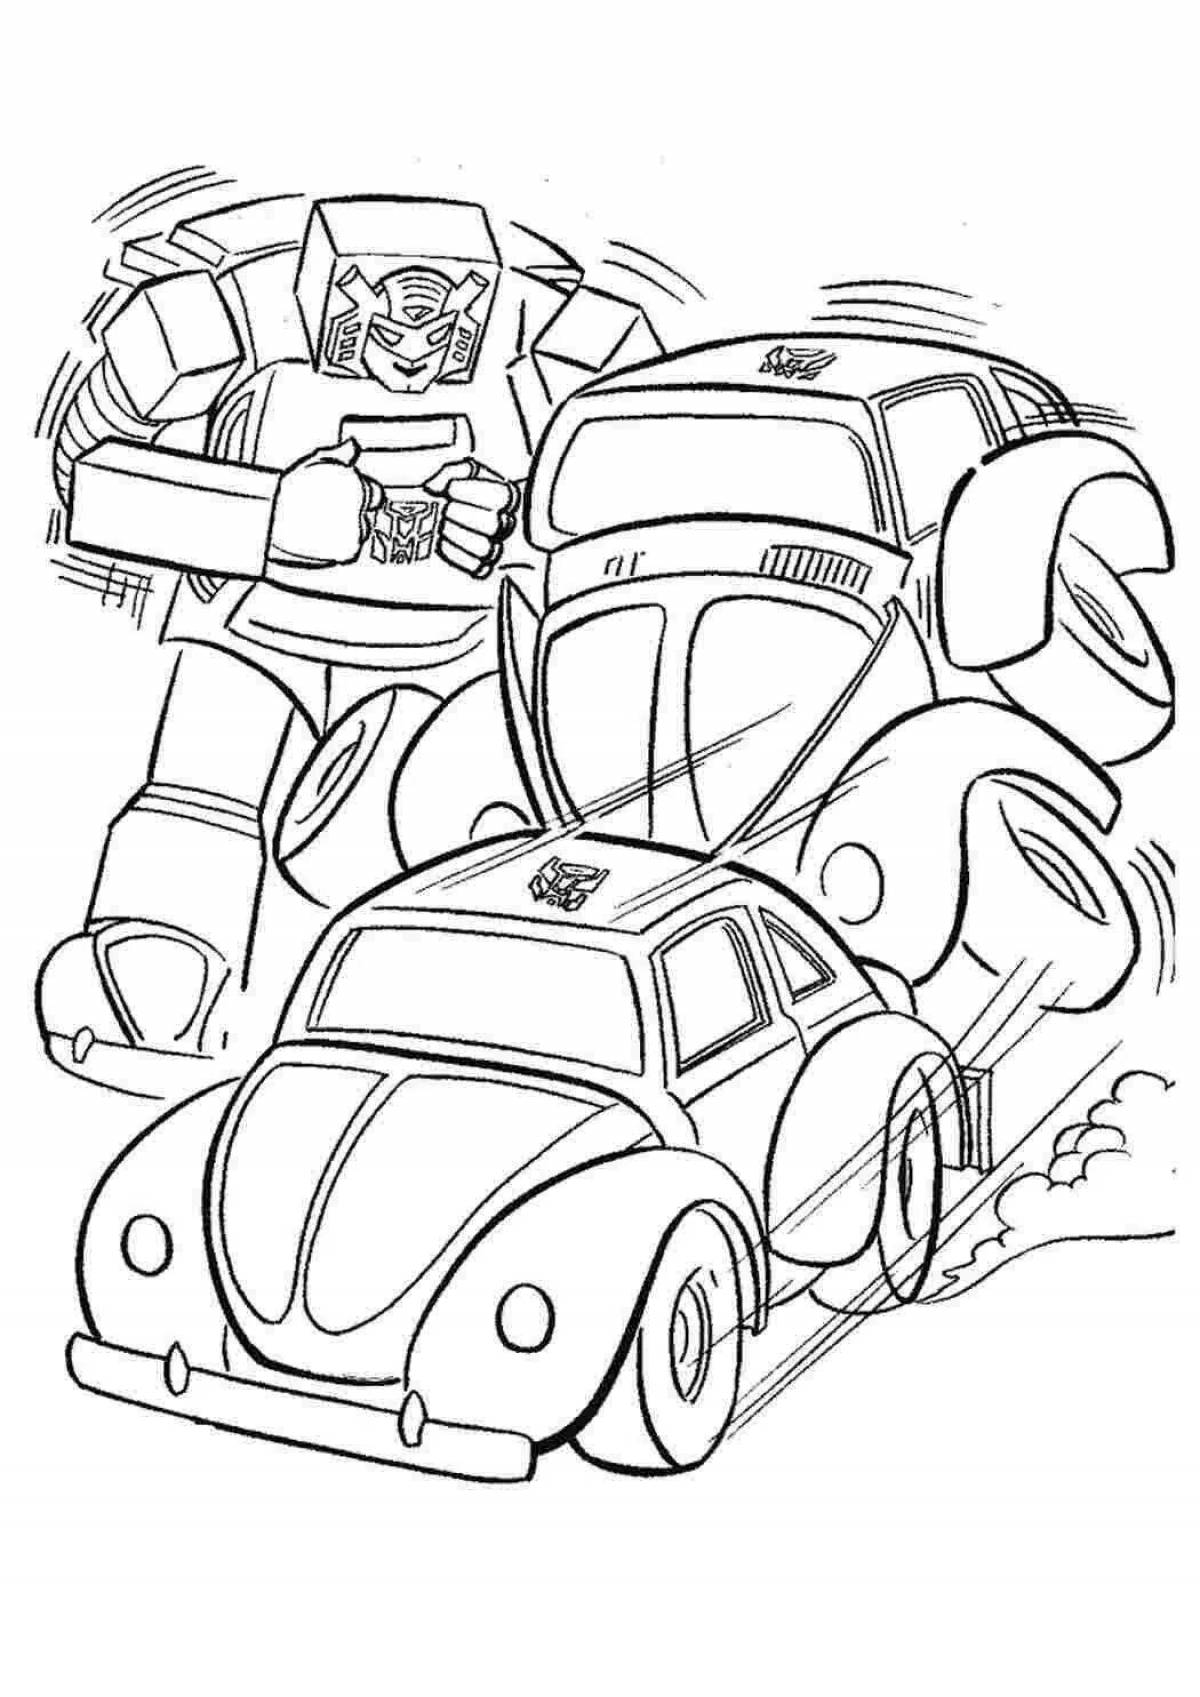 Cute bumblebee robot coloring page